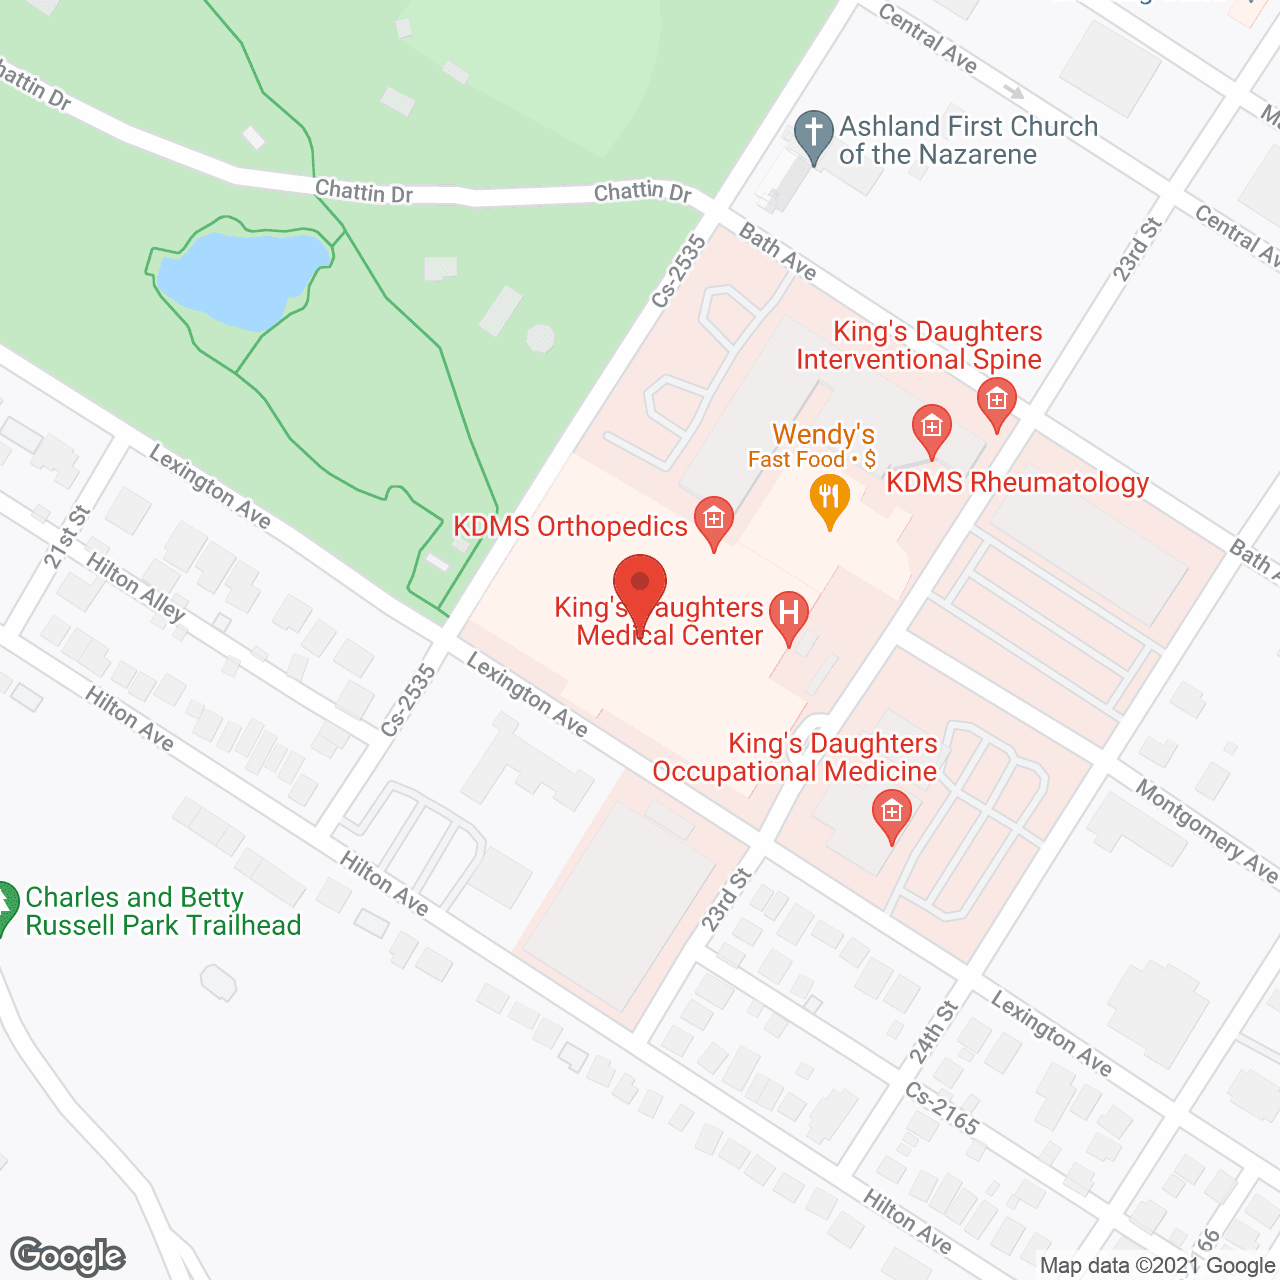 King's Daughter's Medical Center in google map